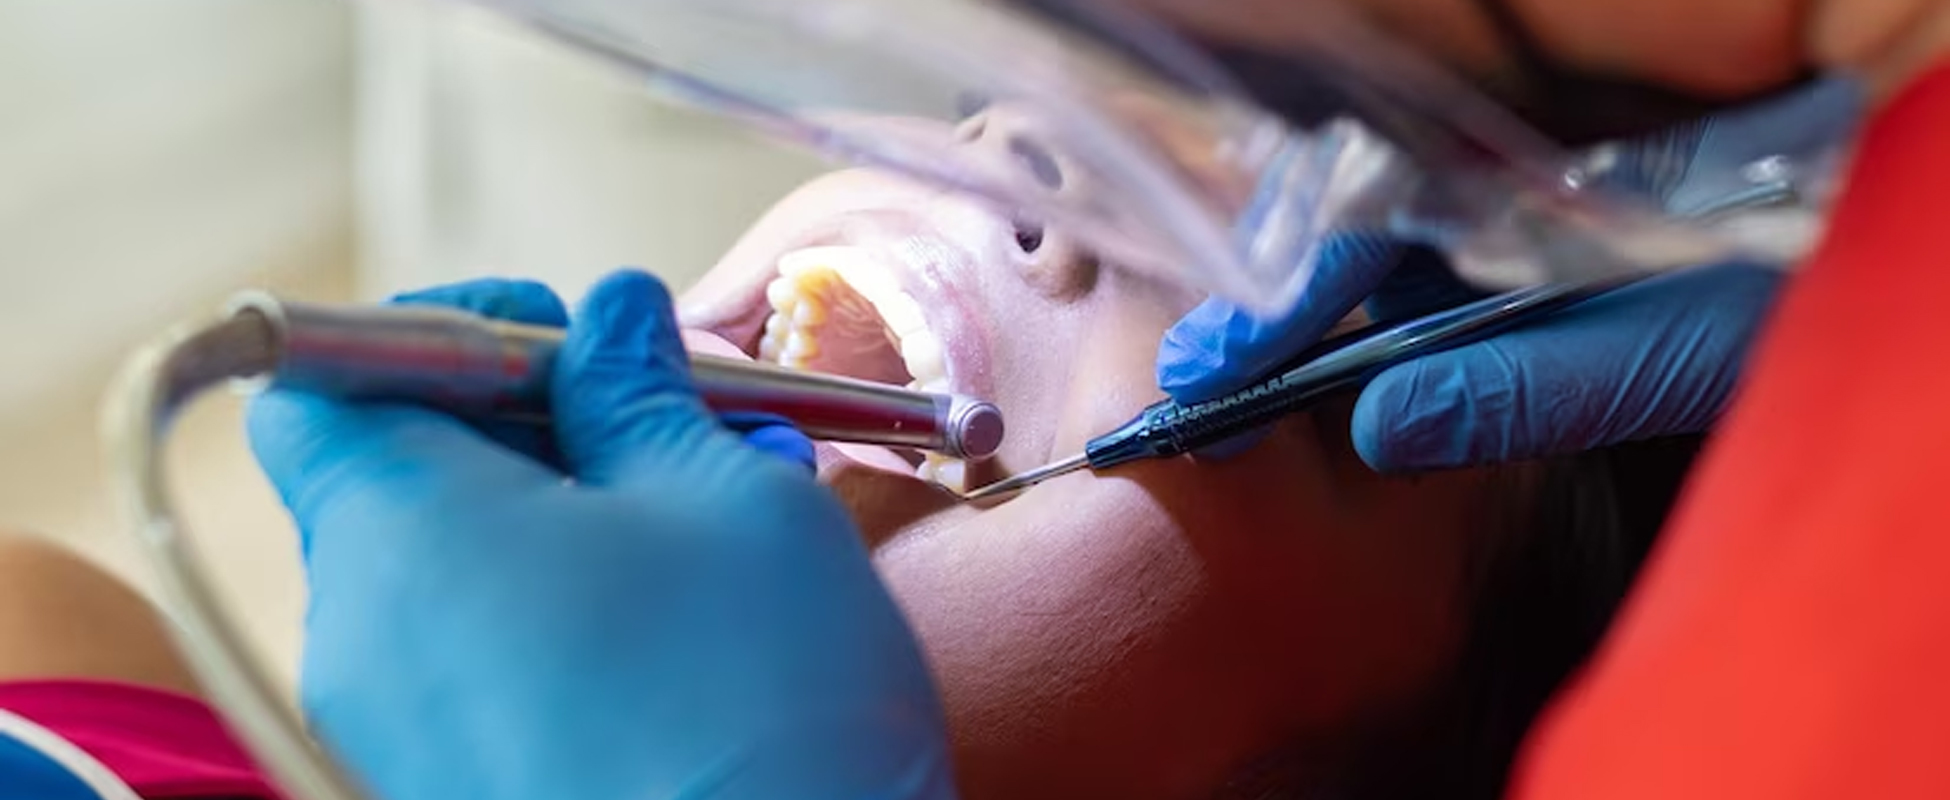 WHAT IS THE DIFFERENCE BETWEEN DENTAL FILLINGS & ROOT CANAL TREATMENT?